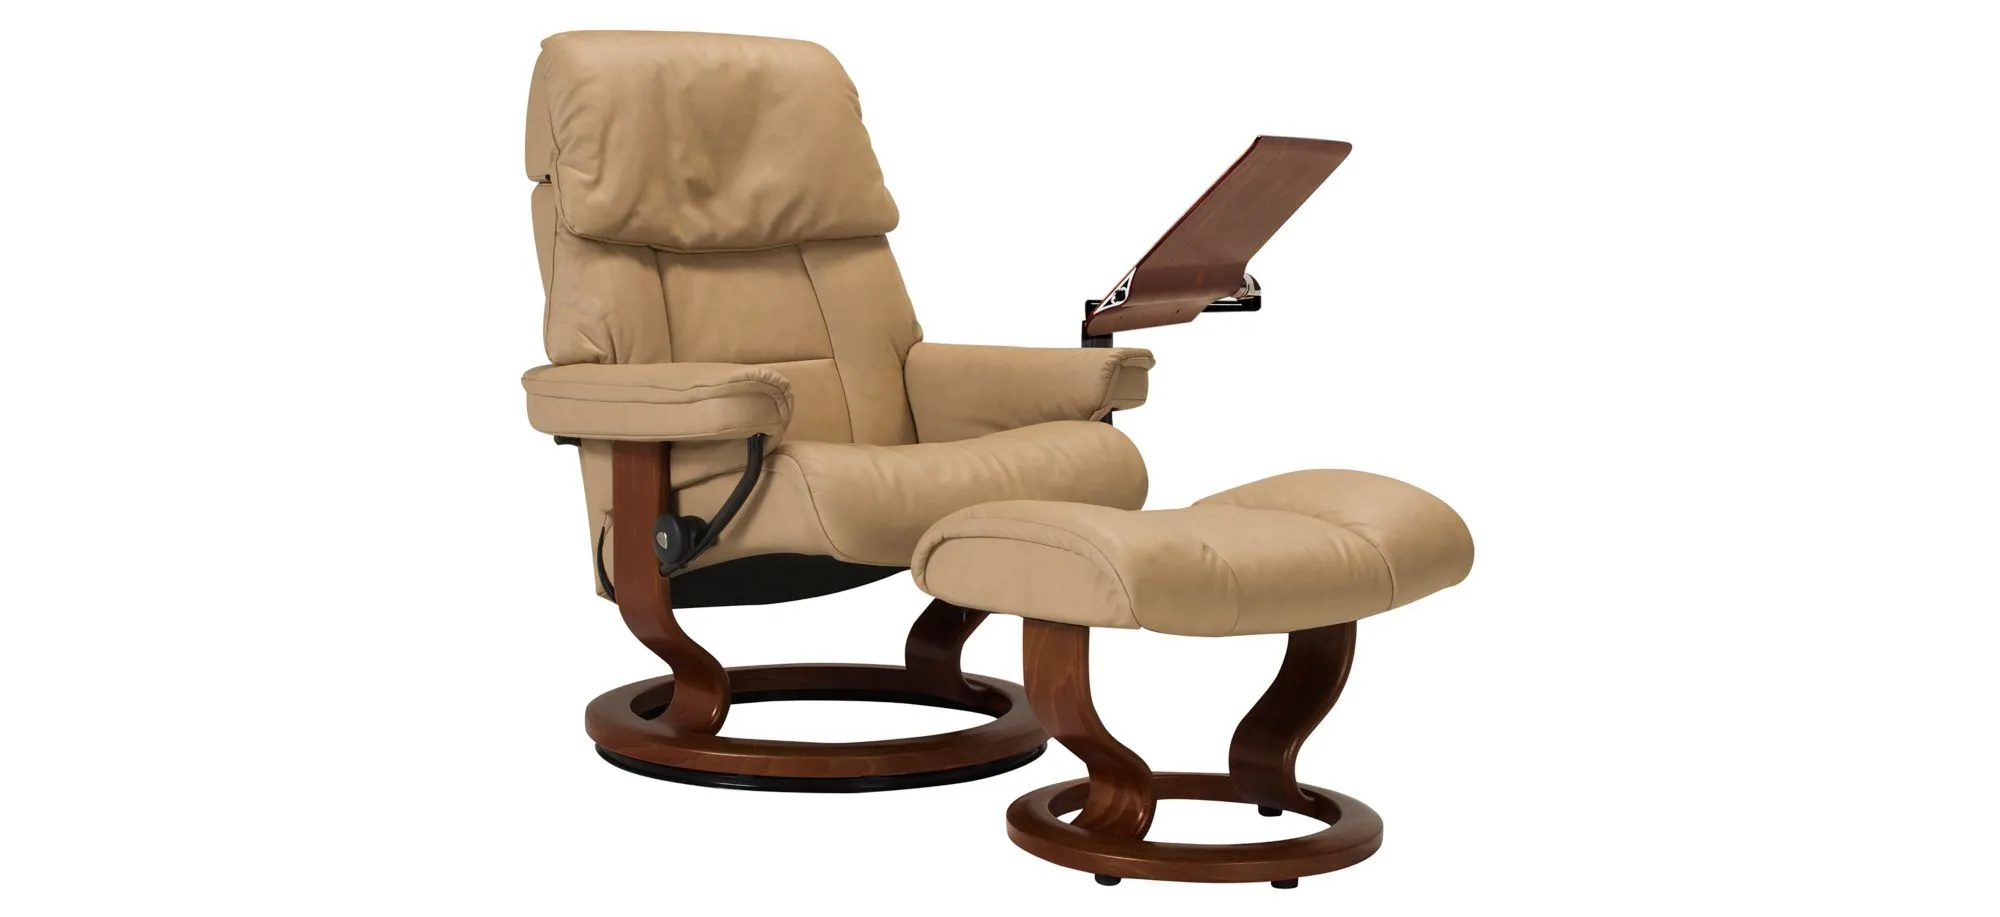 Stressless Ruby Medium Leather Reclining Chair and Ottoman w/ Table in Sand / Brown by Stressless